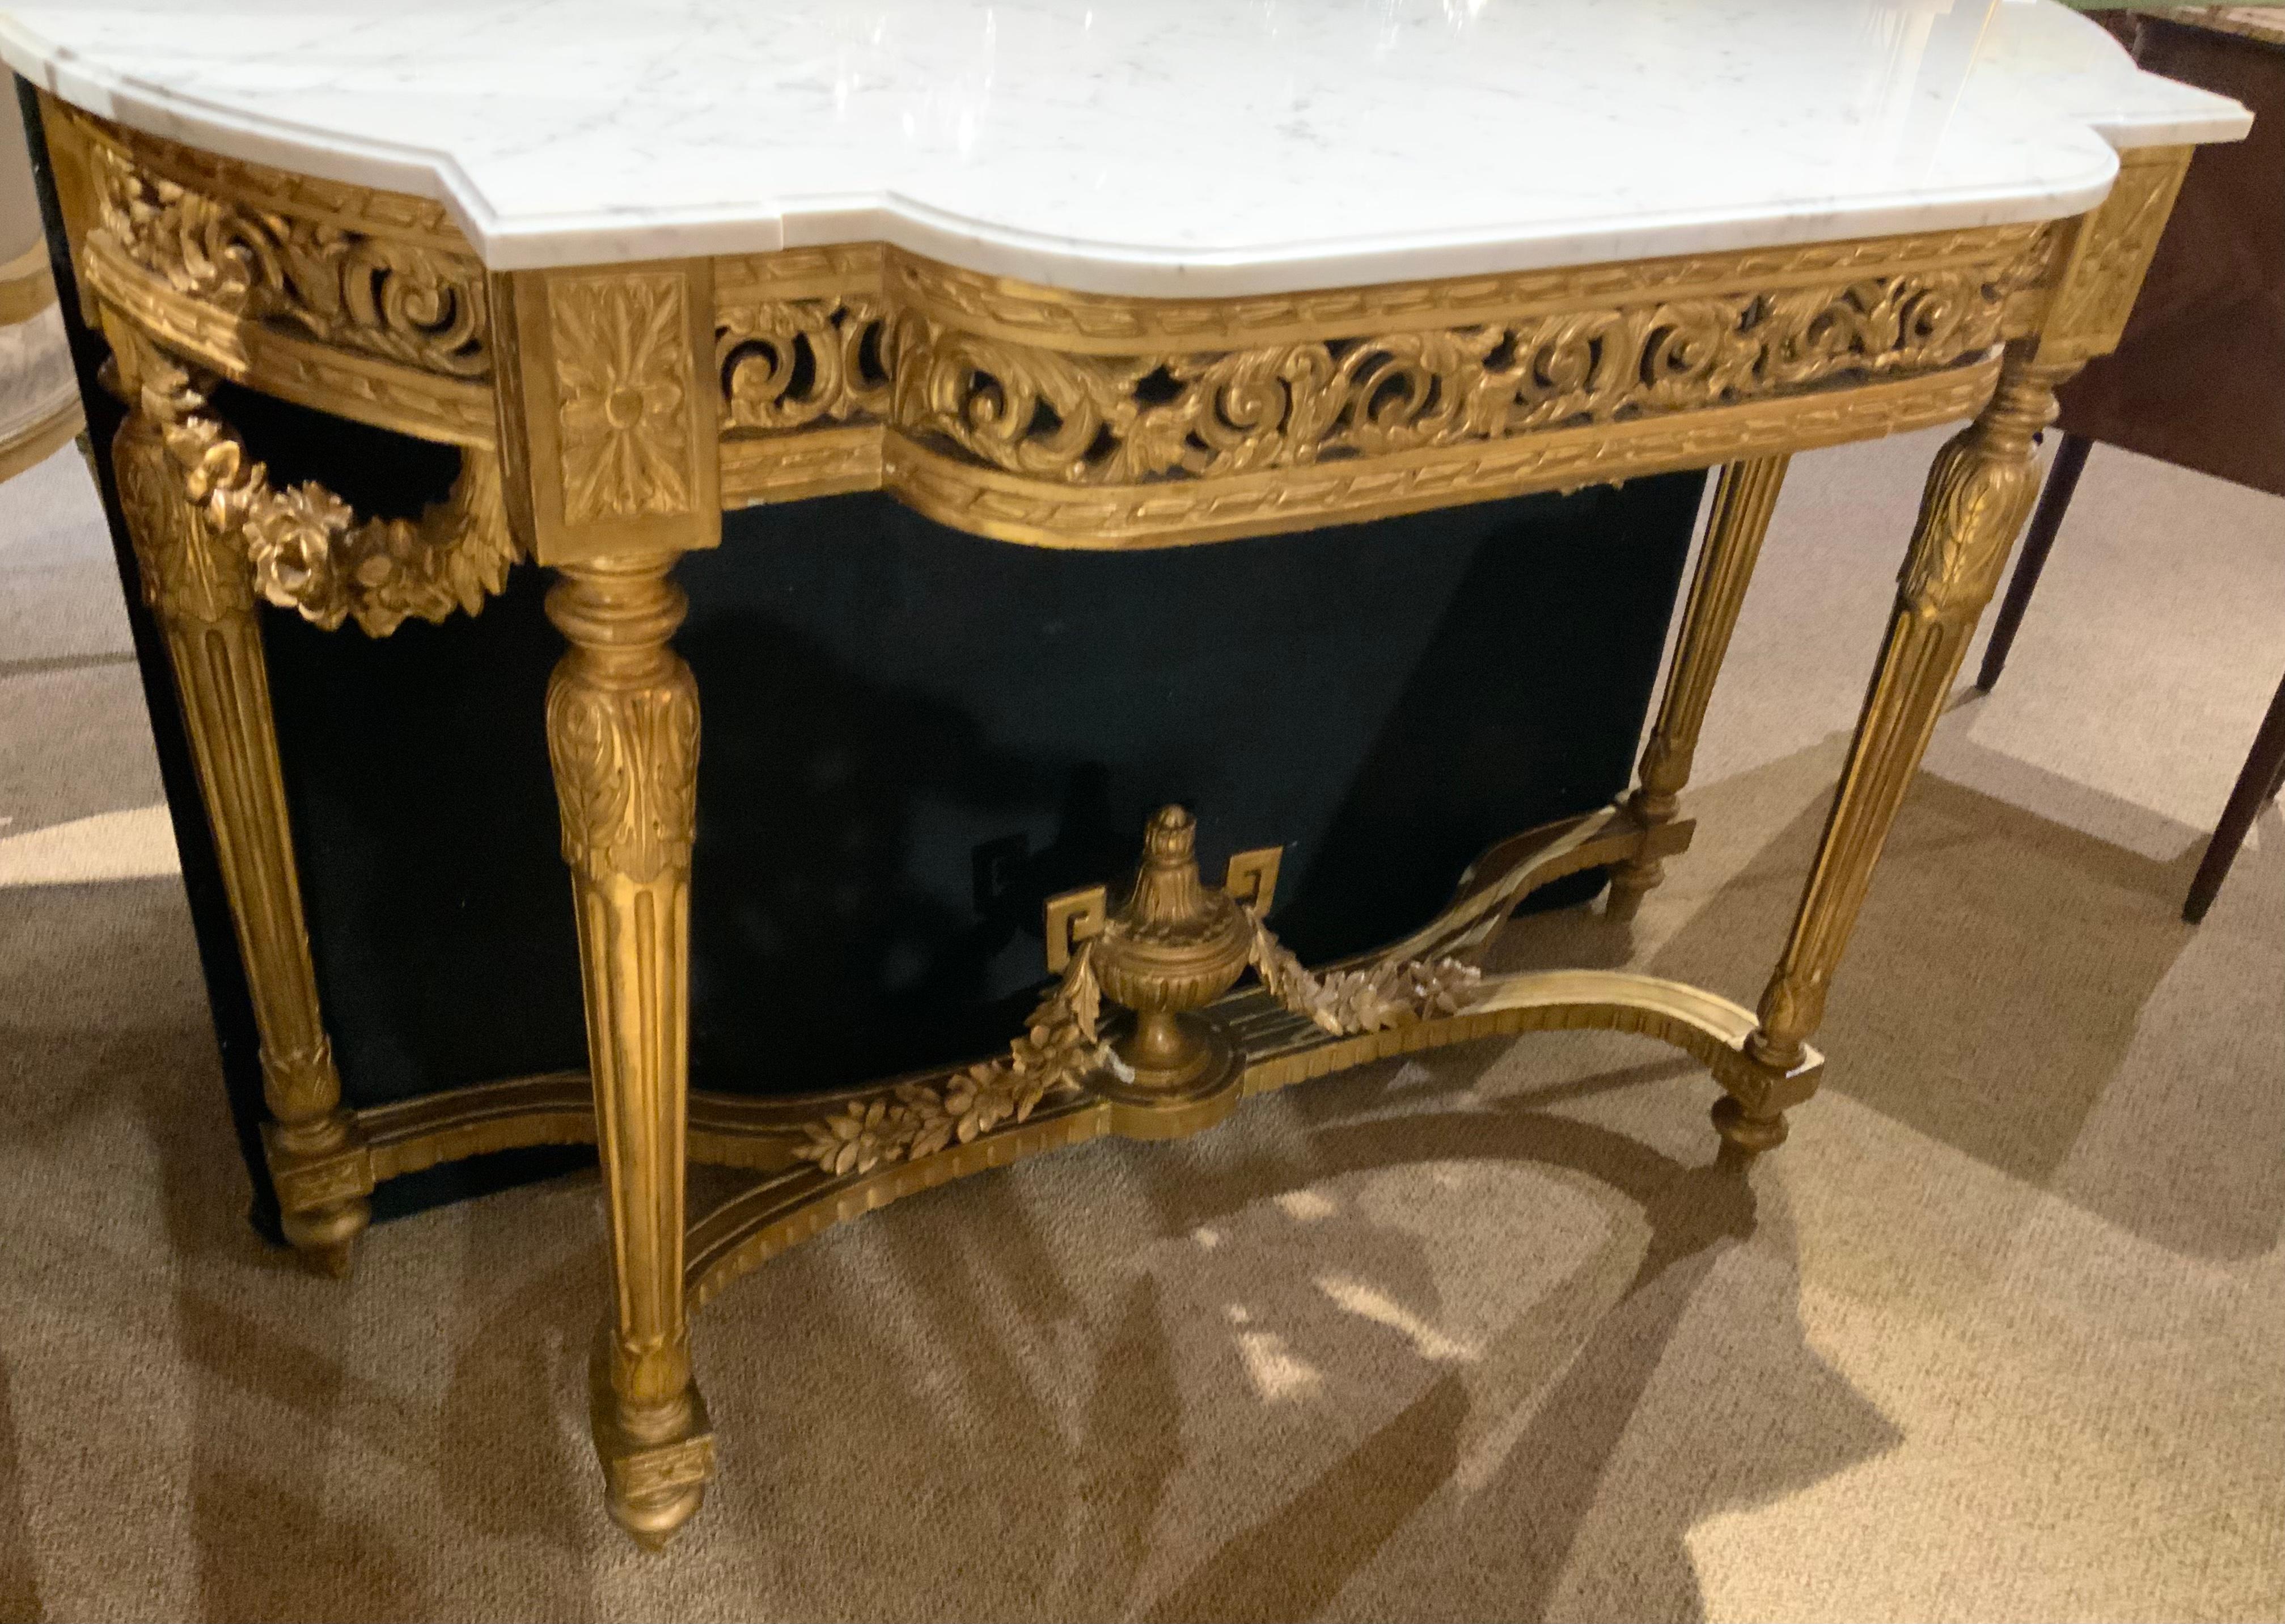 19th Century French Giltwood Console with White Marble Top, Louis XVI-Style, 19 Th Century